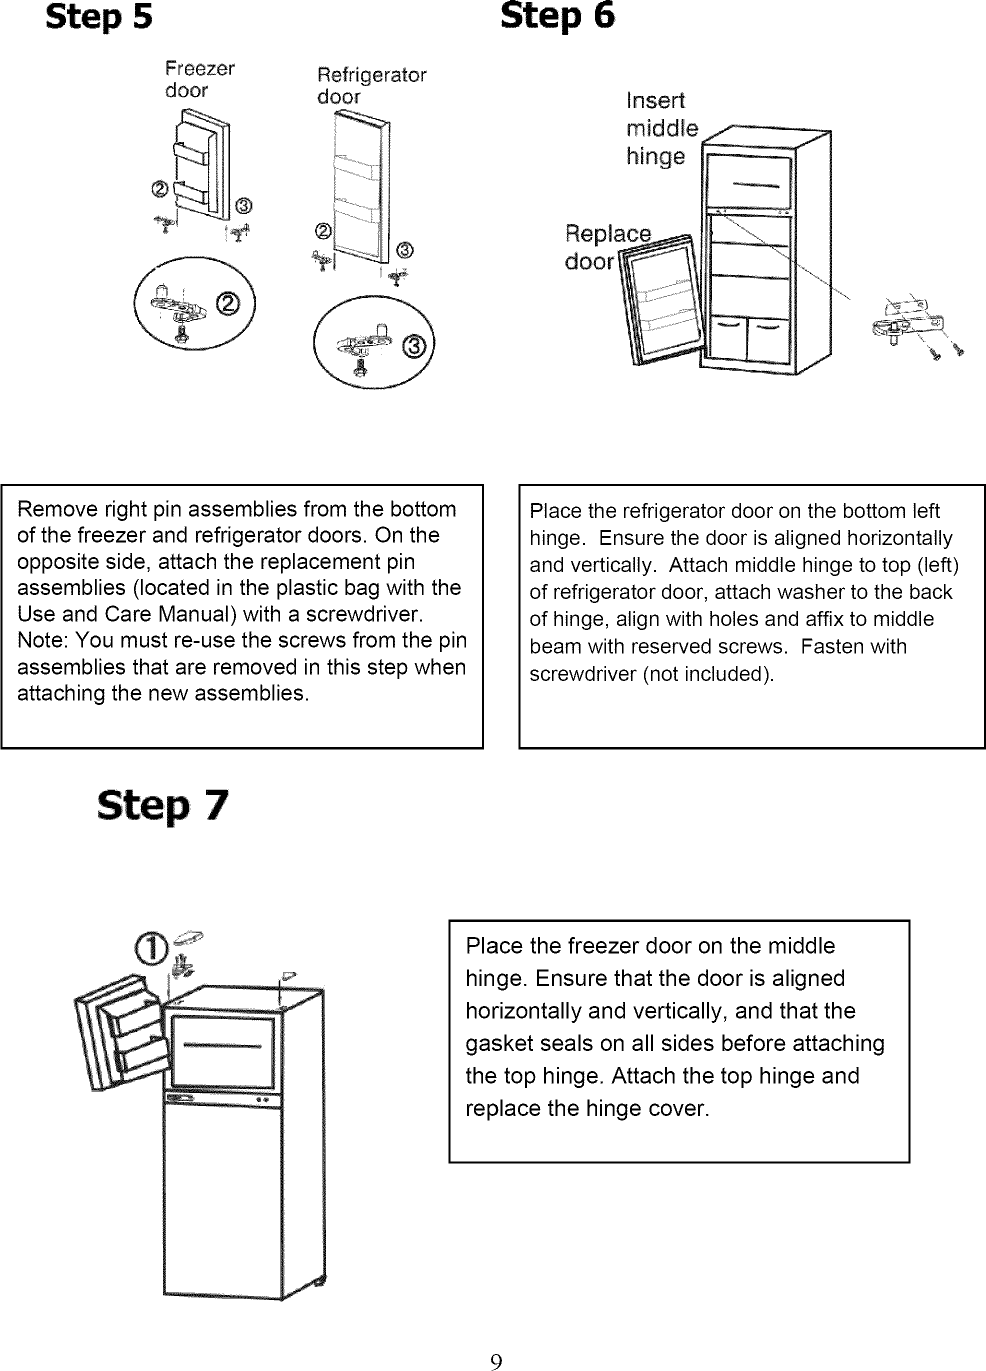 Page 10 of 12 - Vissani HMDR1030WE User Manual  REFRIGERATOR - Manuals And Guides 1401121L